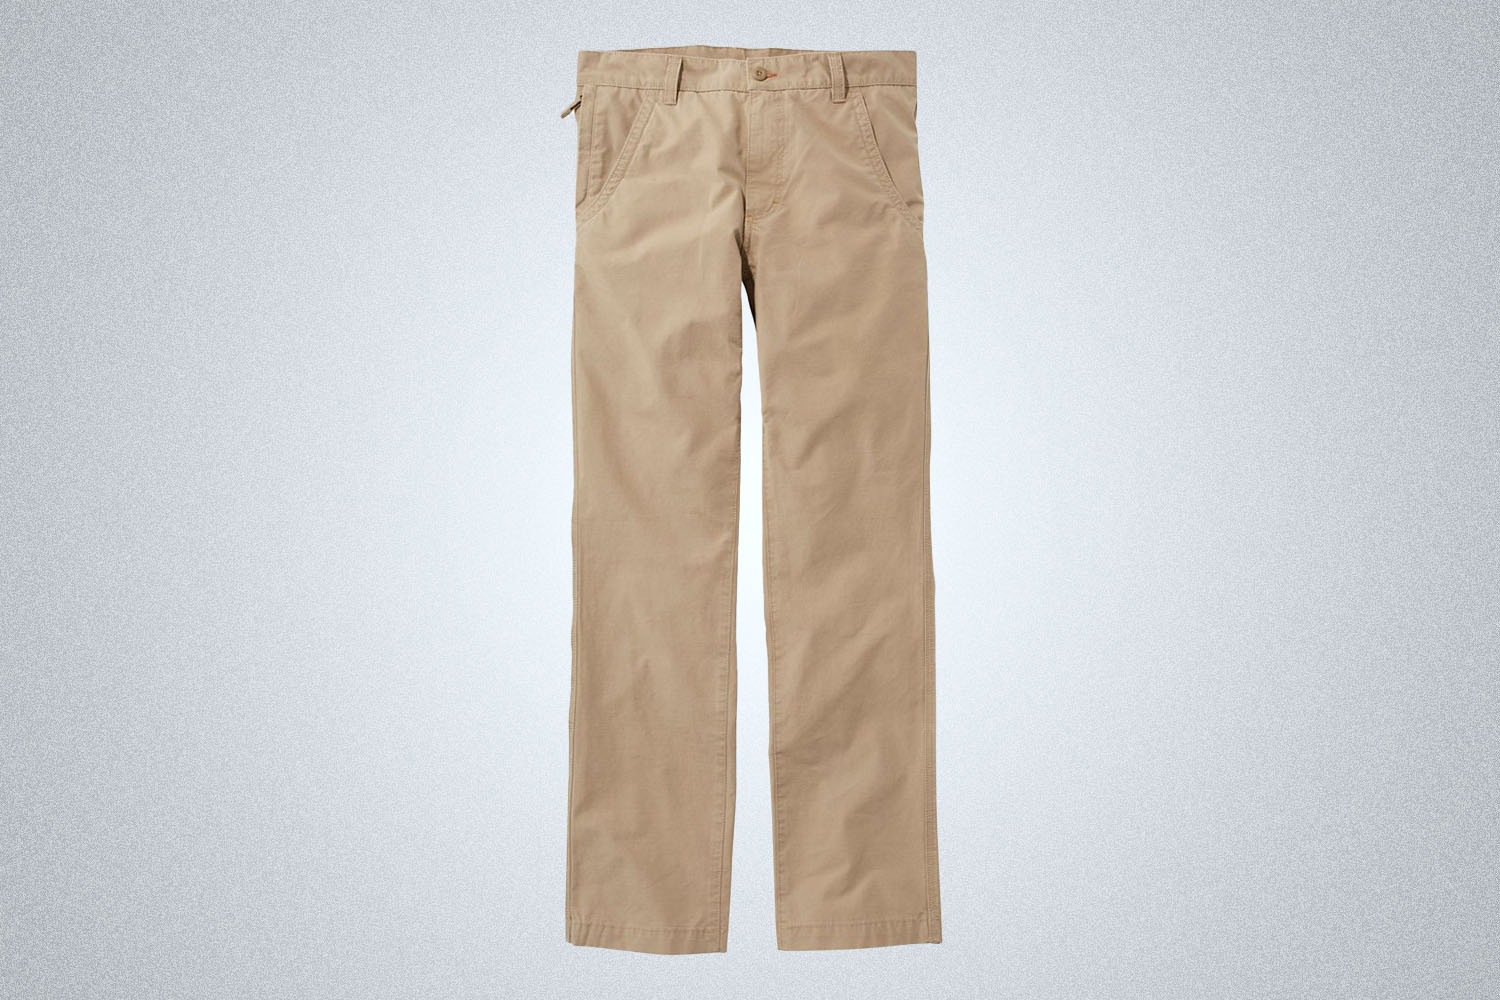 a pair of chinos